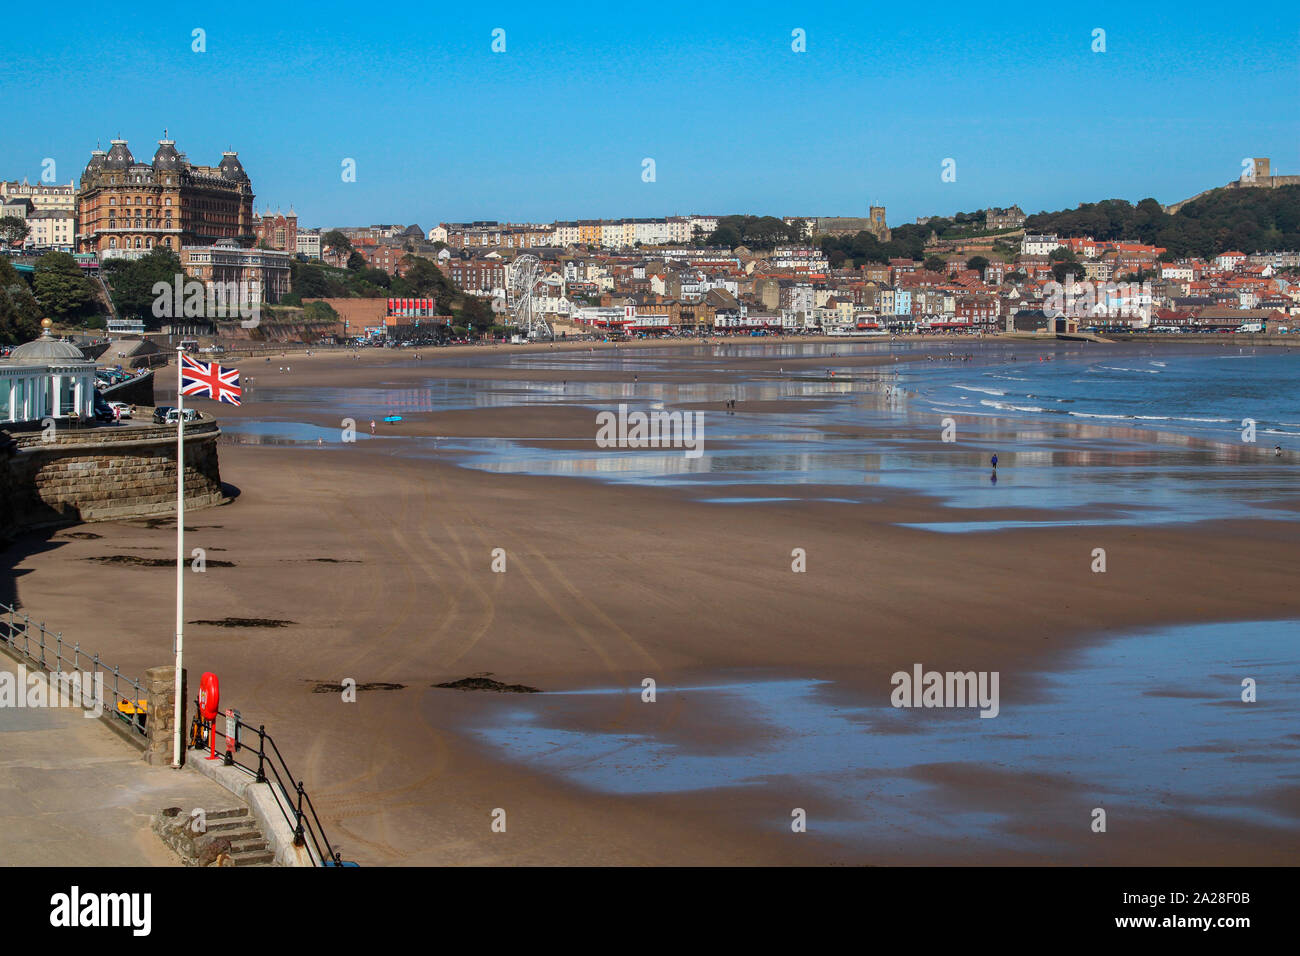 Scarborough. United Kingdom. 09.19.19. The beach at low tide in the seaside resort of Scarborough on the North Yorkshire coast in the northeast of Eng Stock Photo